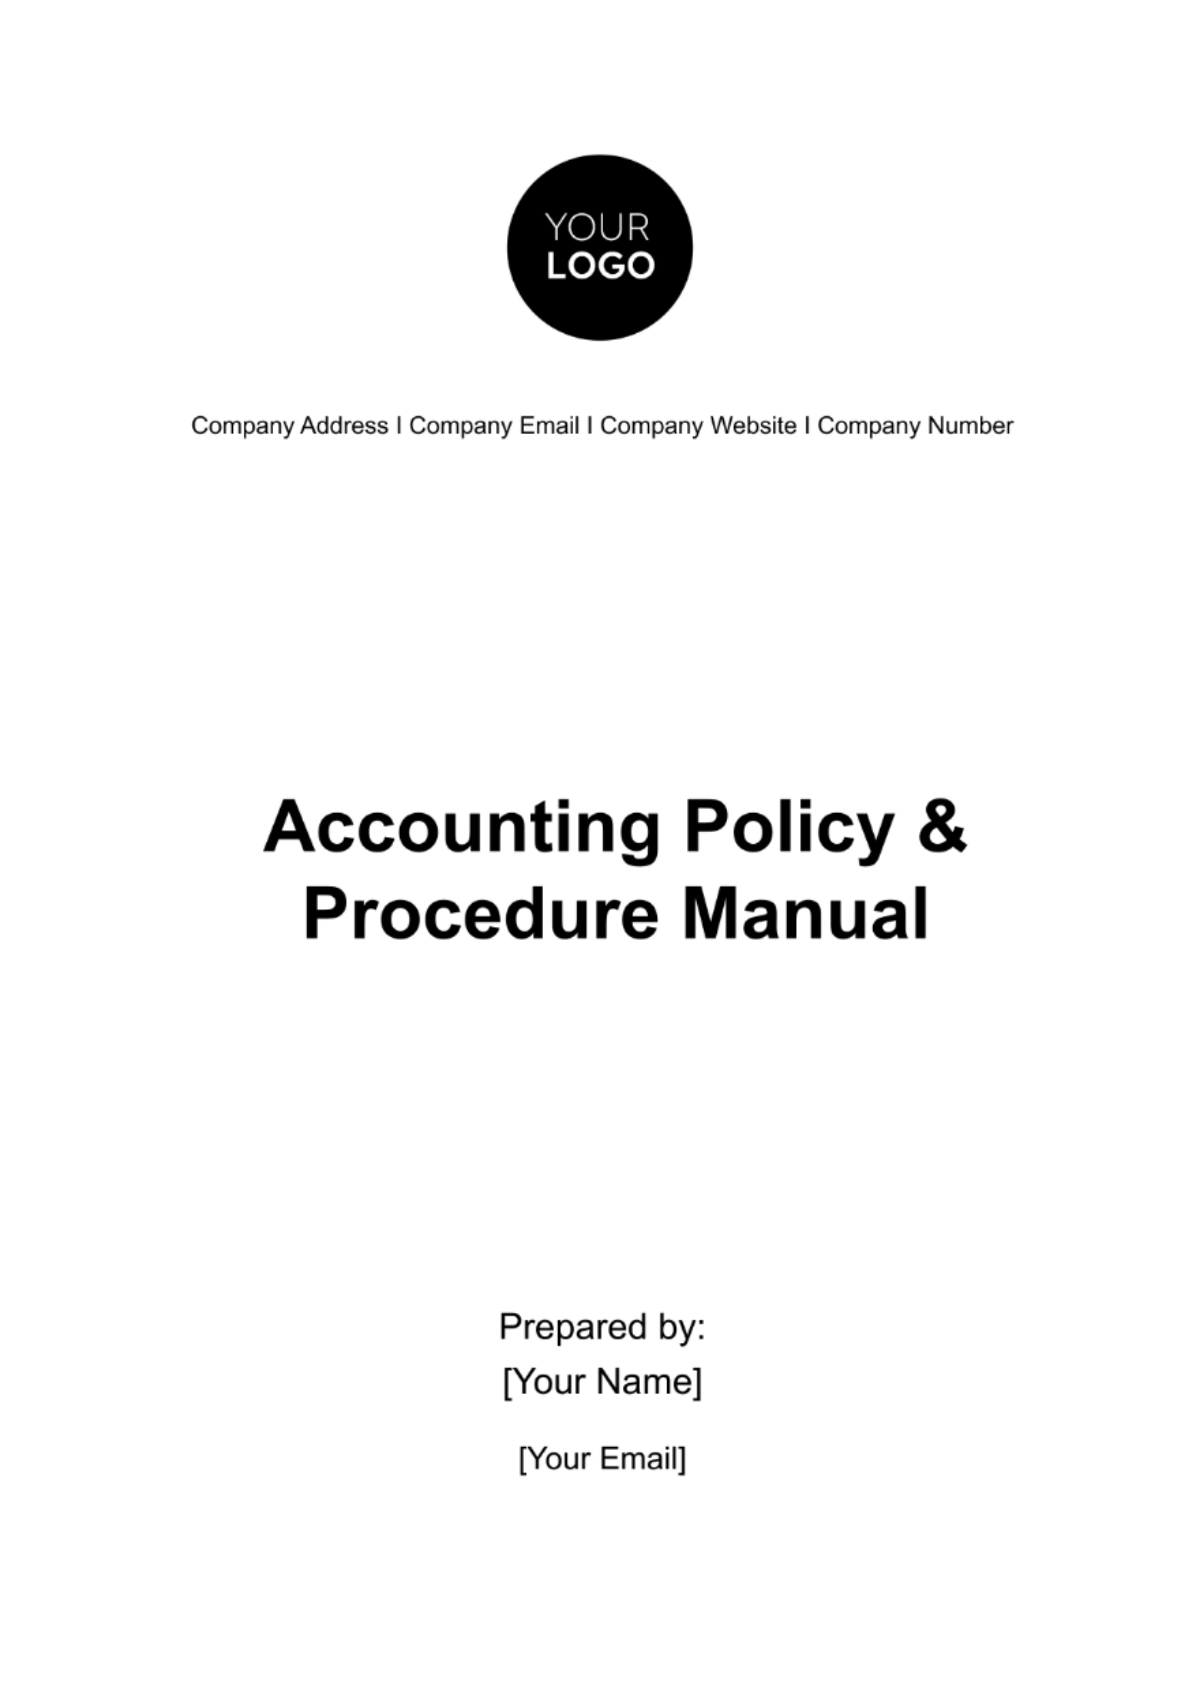 Accounting Policy & Procedure Manual Template